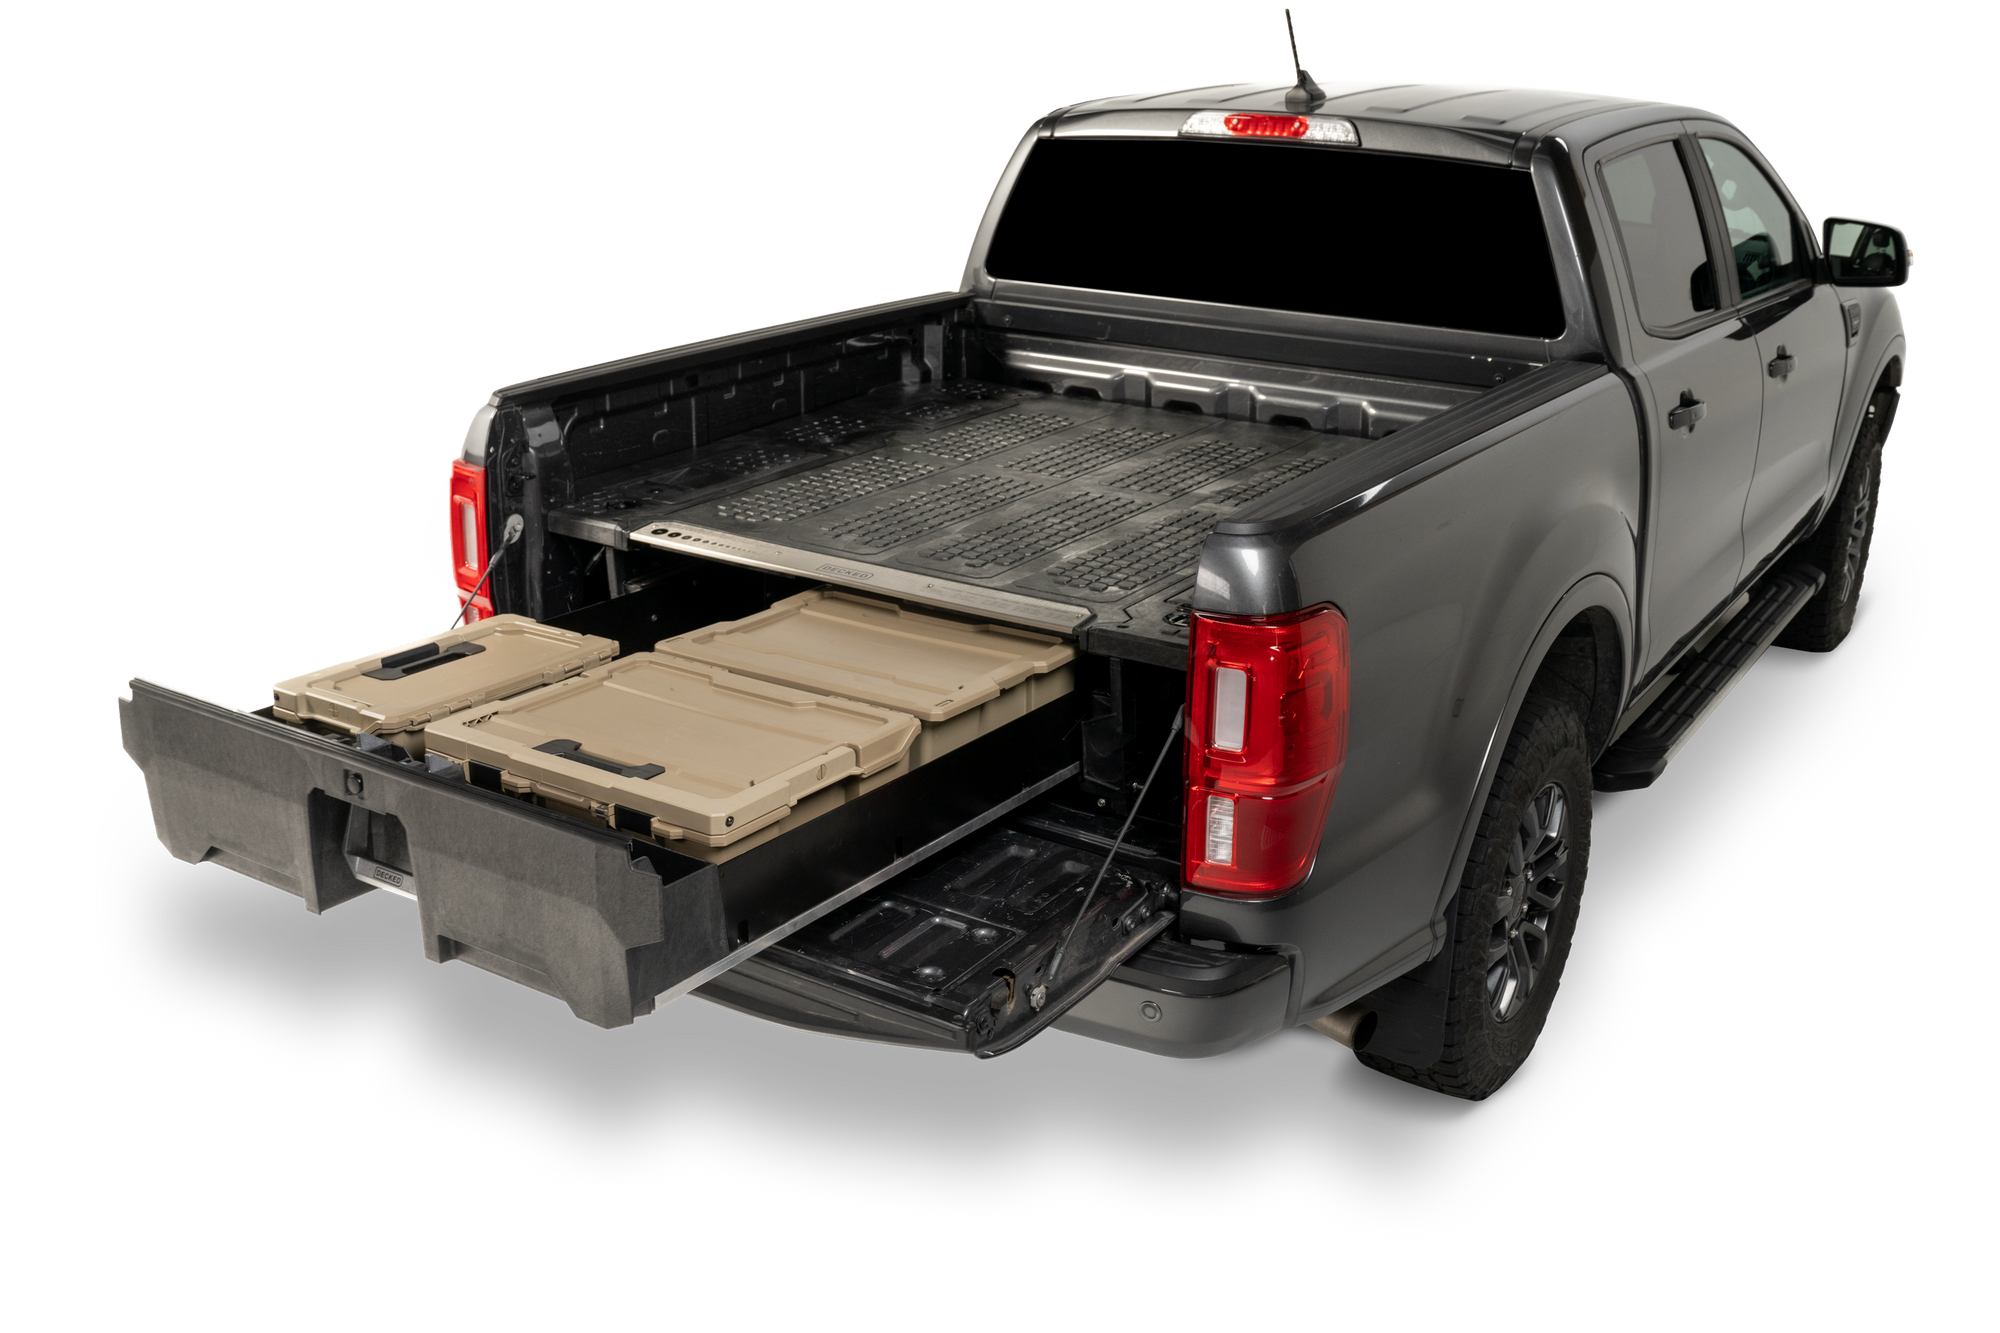 DECKED Bed Drawer System for Ford Super Duty (2017-Current) 6'9" Bed